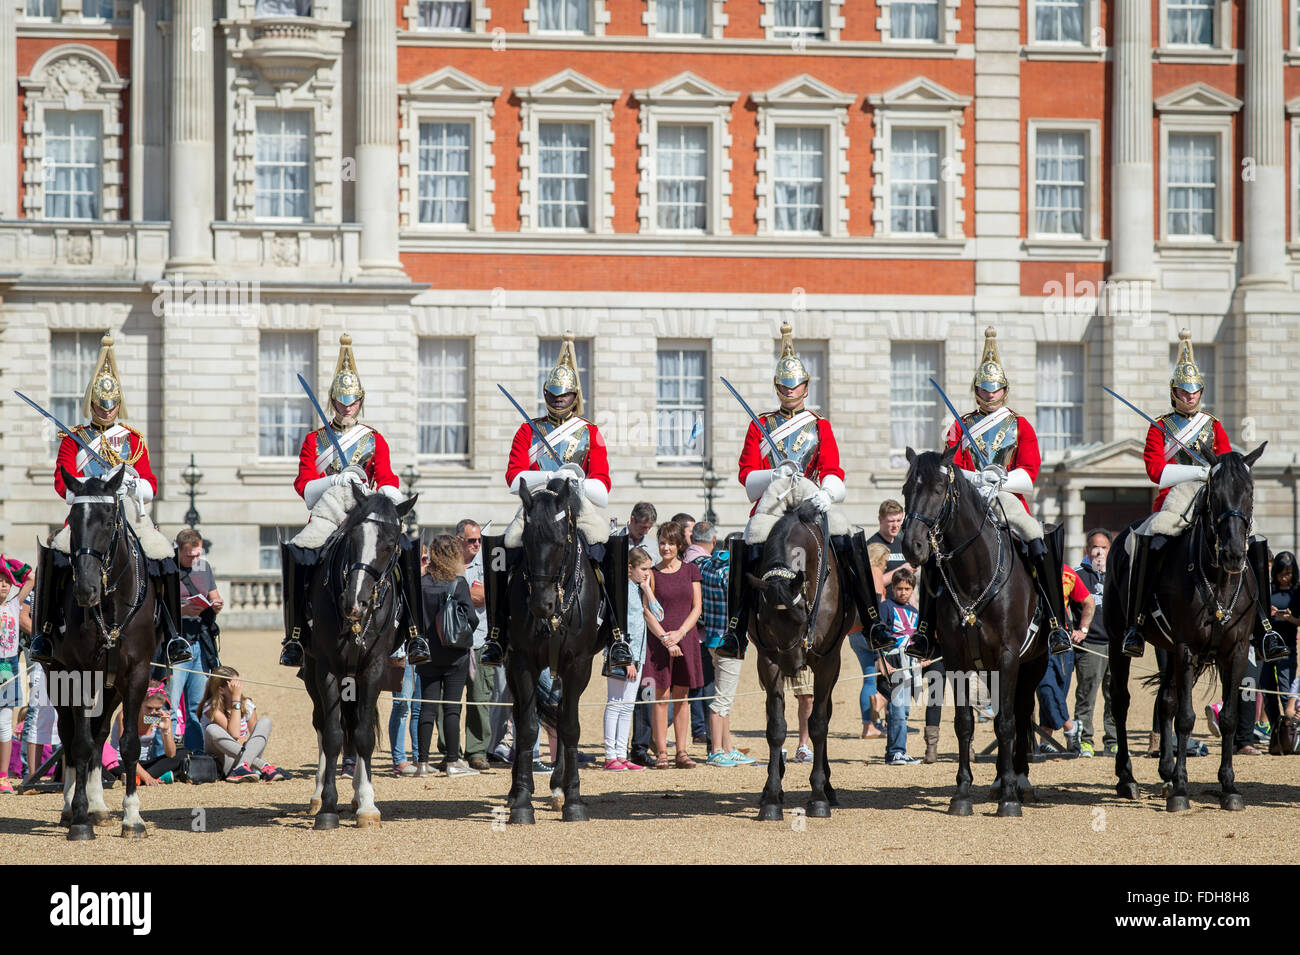 London, England - Changing of the Guard  at Horse Guards Parade Stock Photo